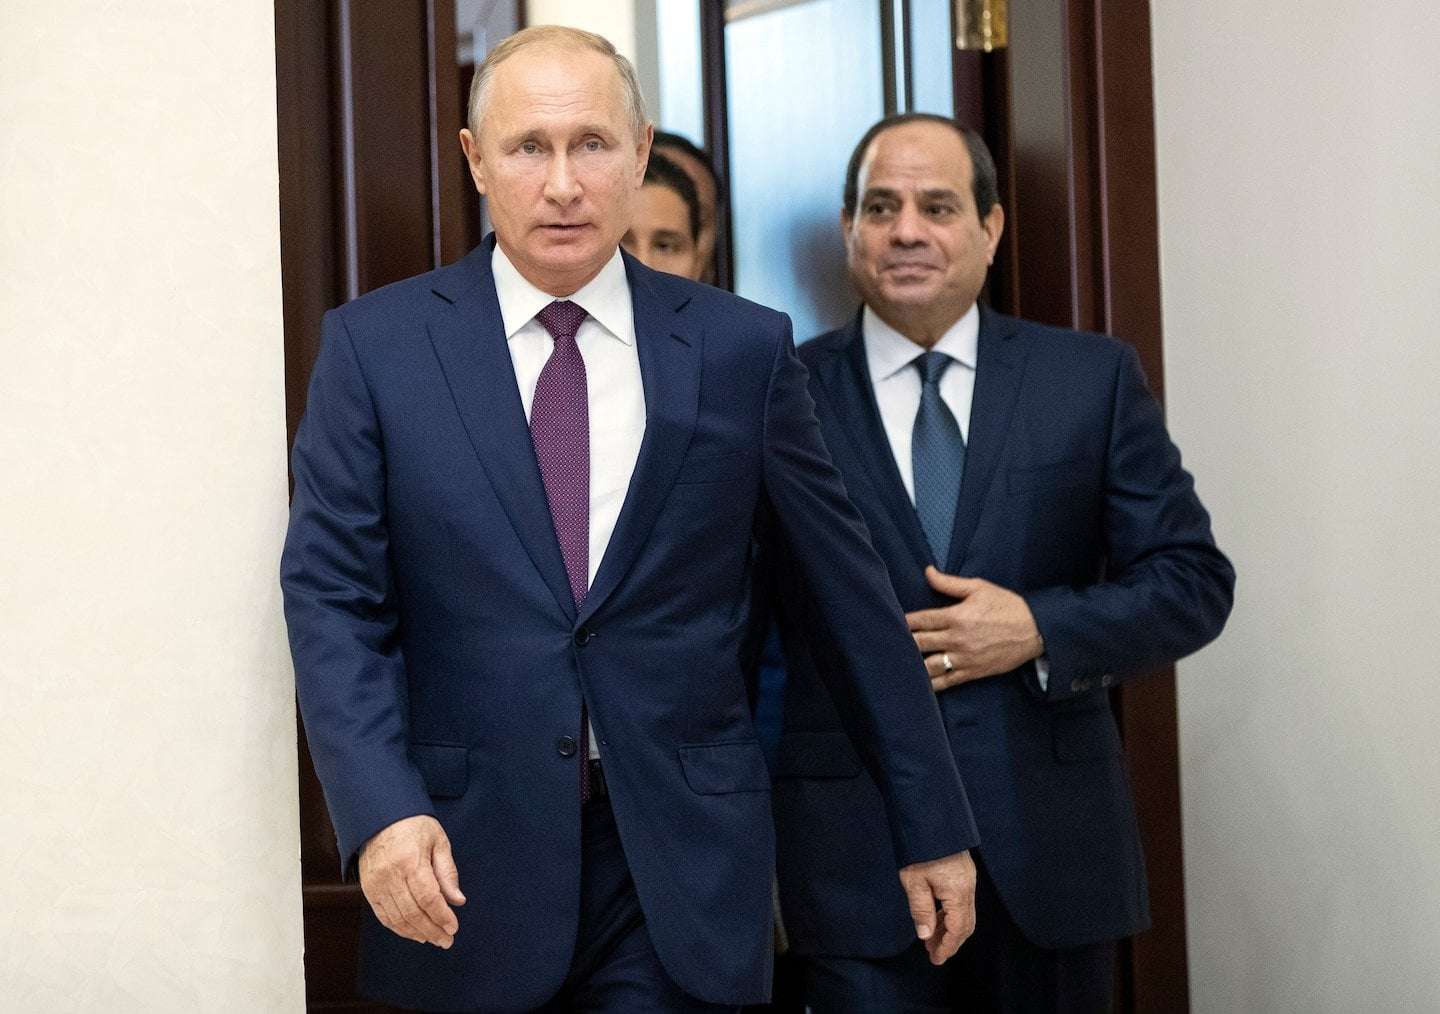 image for Egypt secretly planned to supply rockets to Russia, leaked U.S. document says